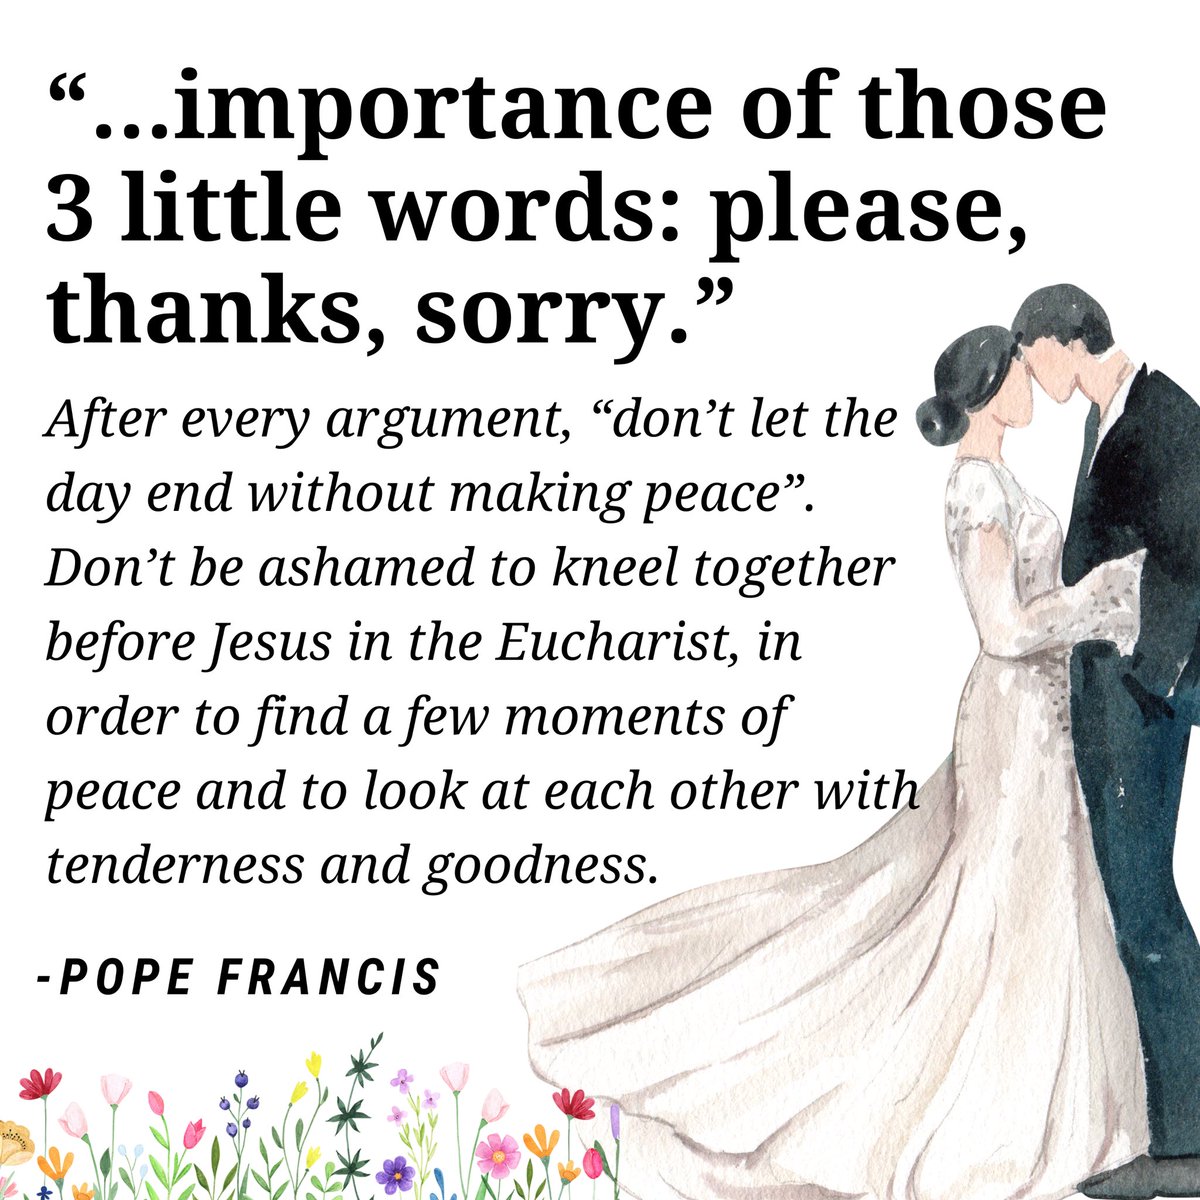 Some of the highlights from the LETTER OF POPE FRANCIS TO MARRIED COUPLES. ❤️ #NotoDivorce FULL TEXT HERE: vatican.va/content/france… #Marriage #MarriedLife #KatolikongPinoy